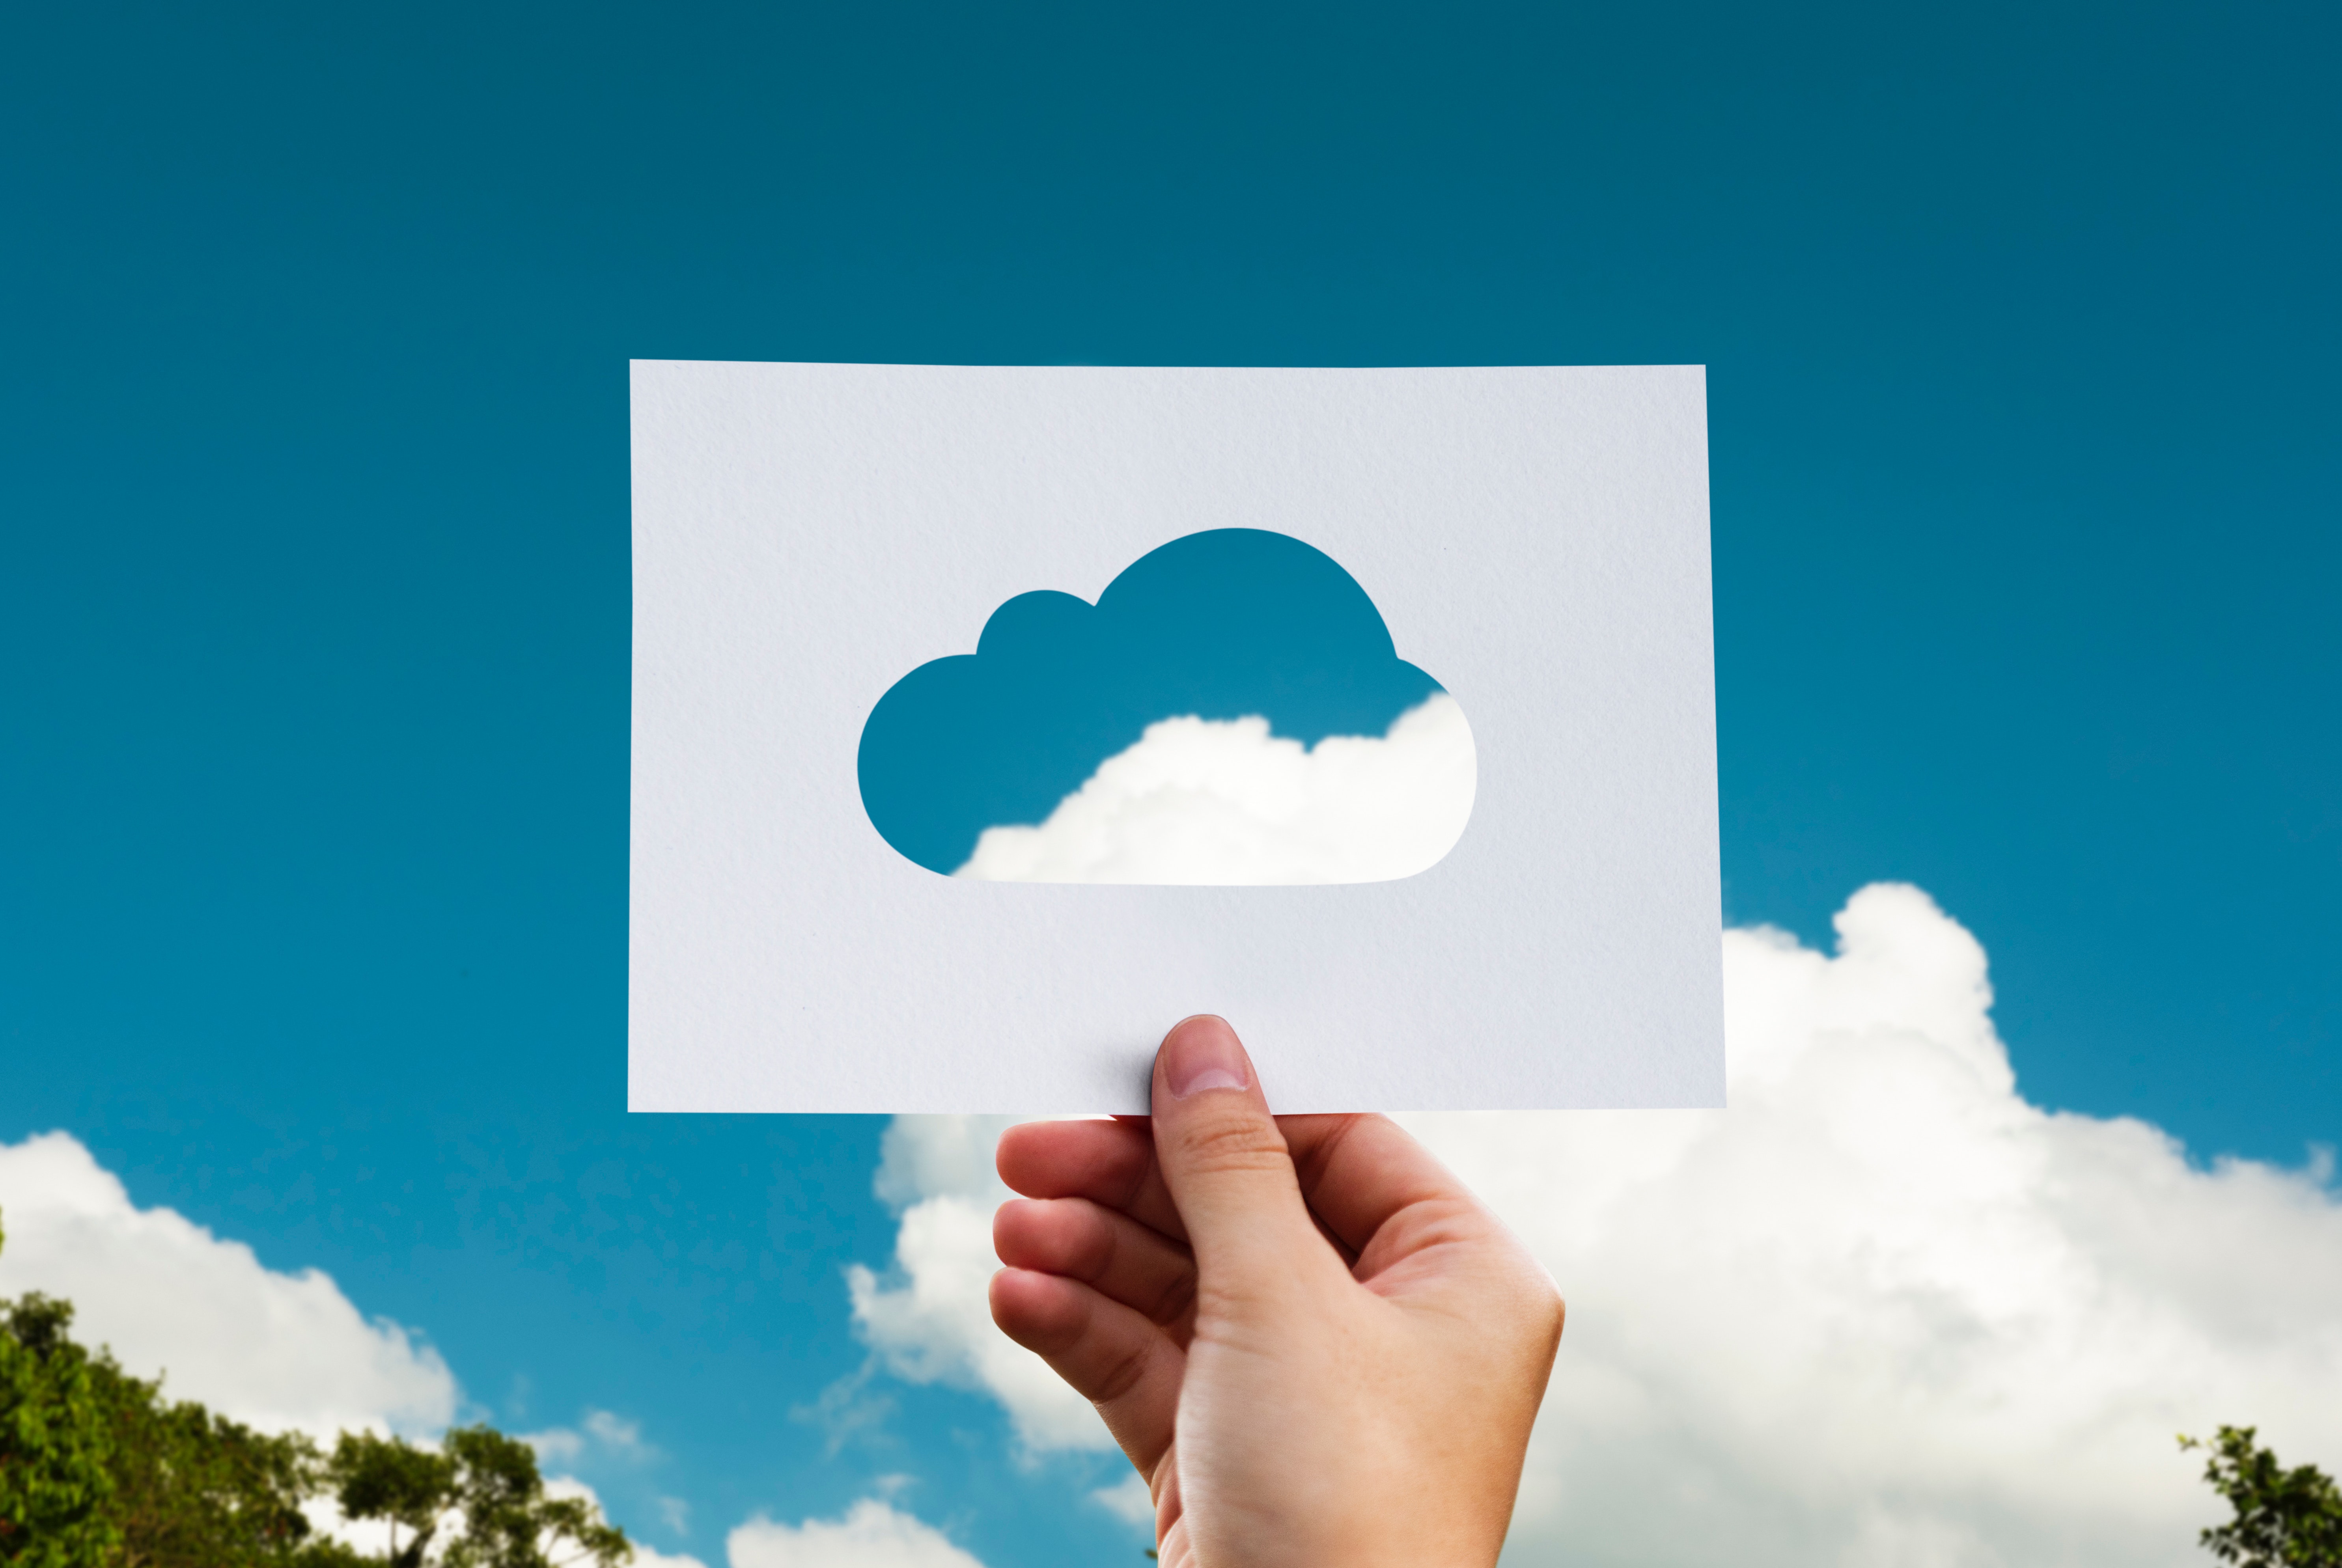 Here are 10 of the most commonly used cloud application acronyms